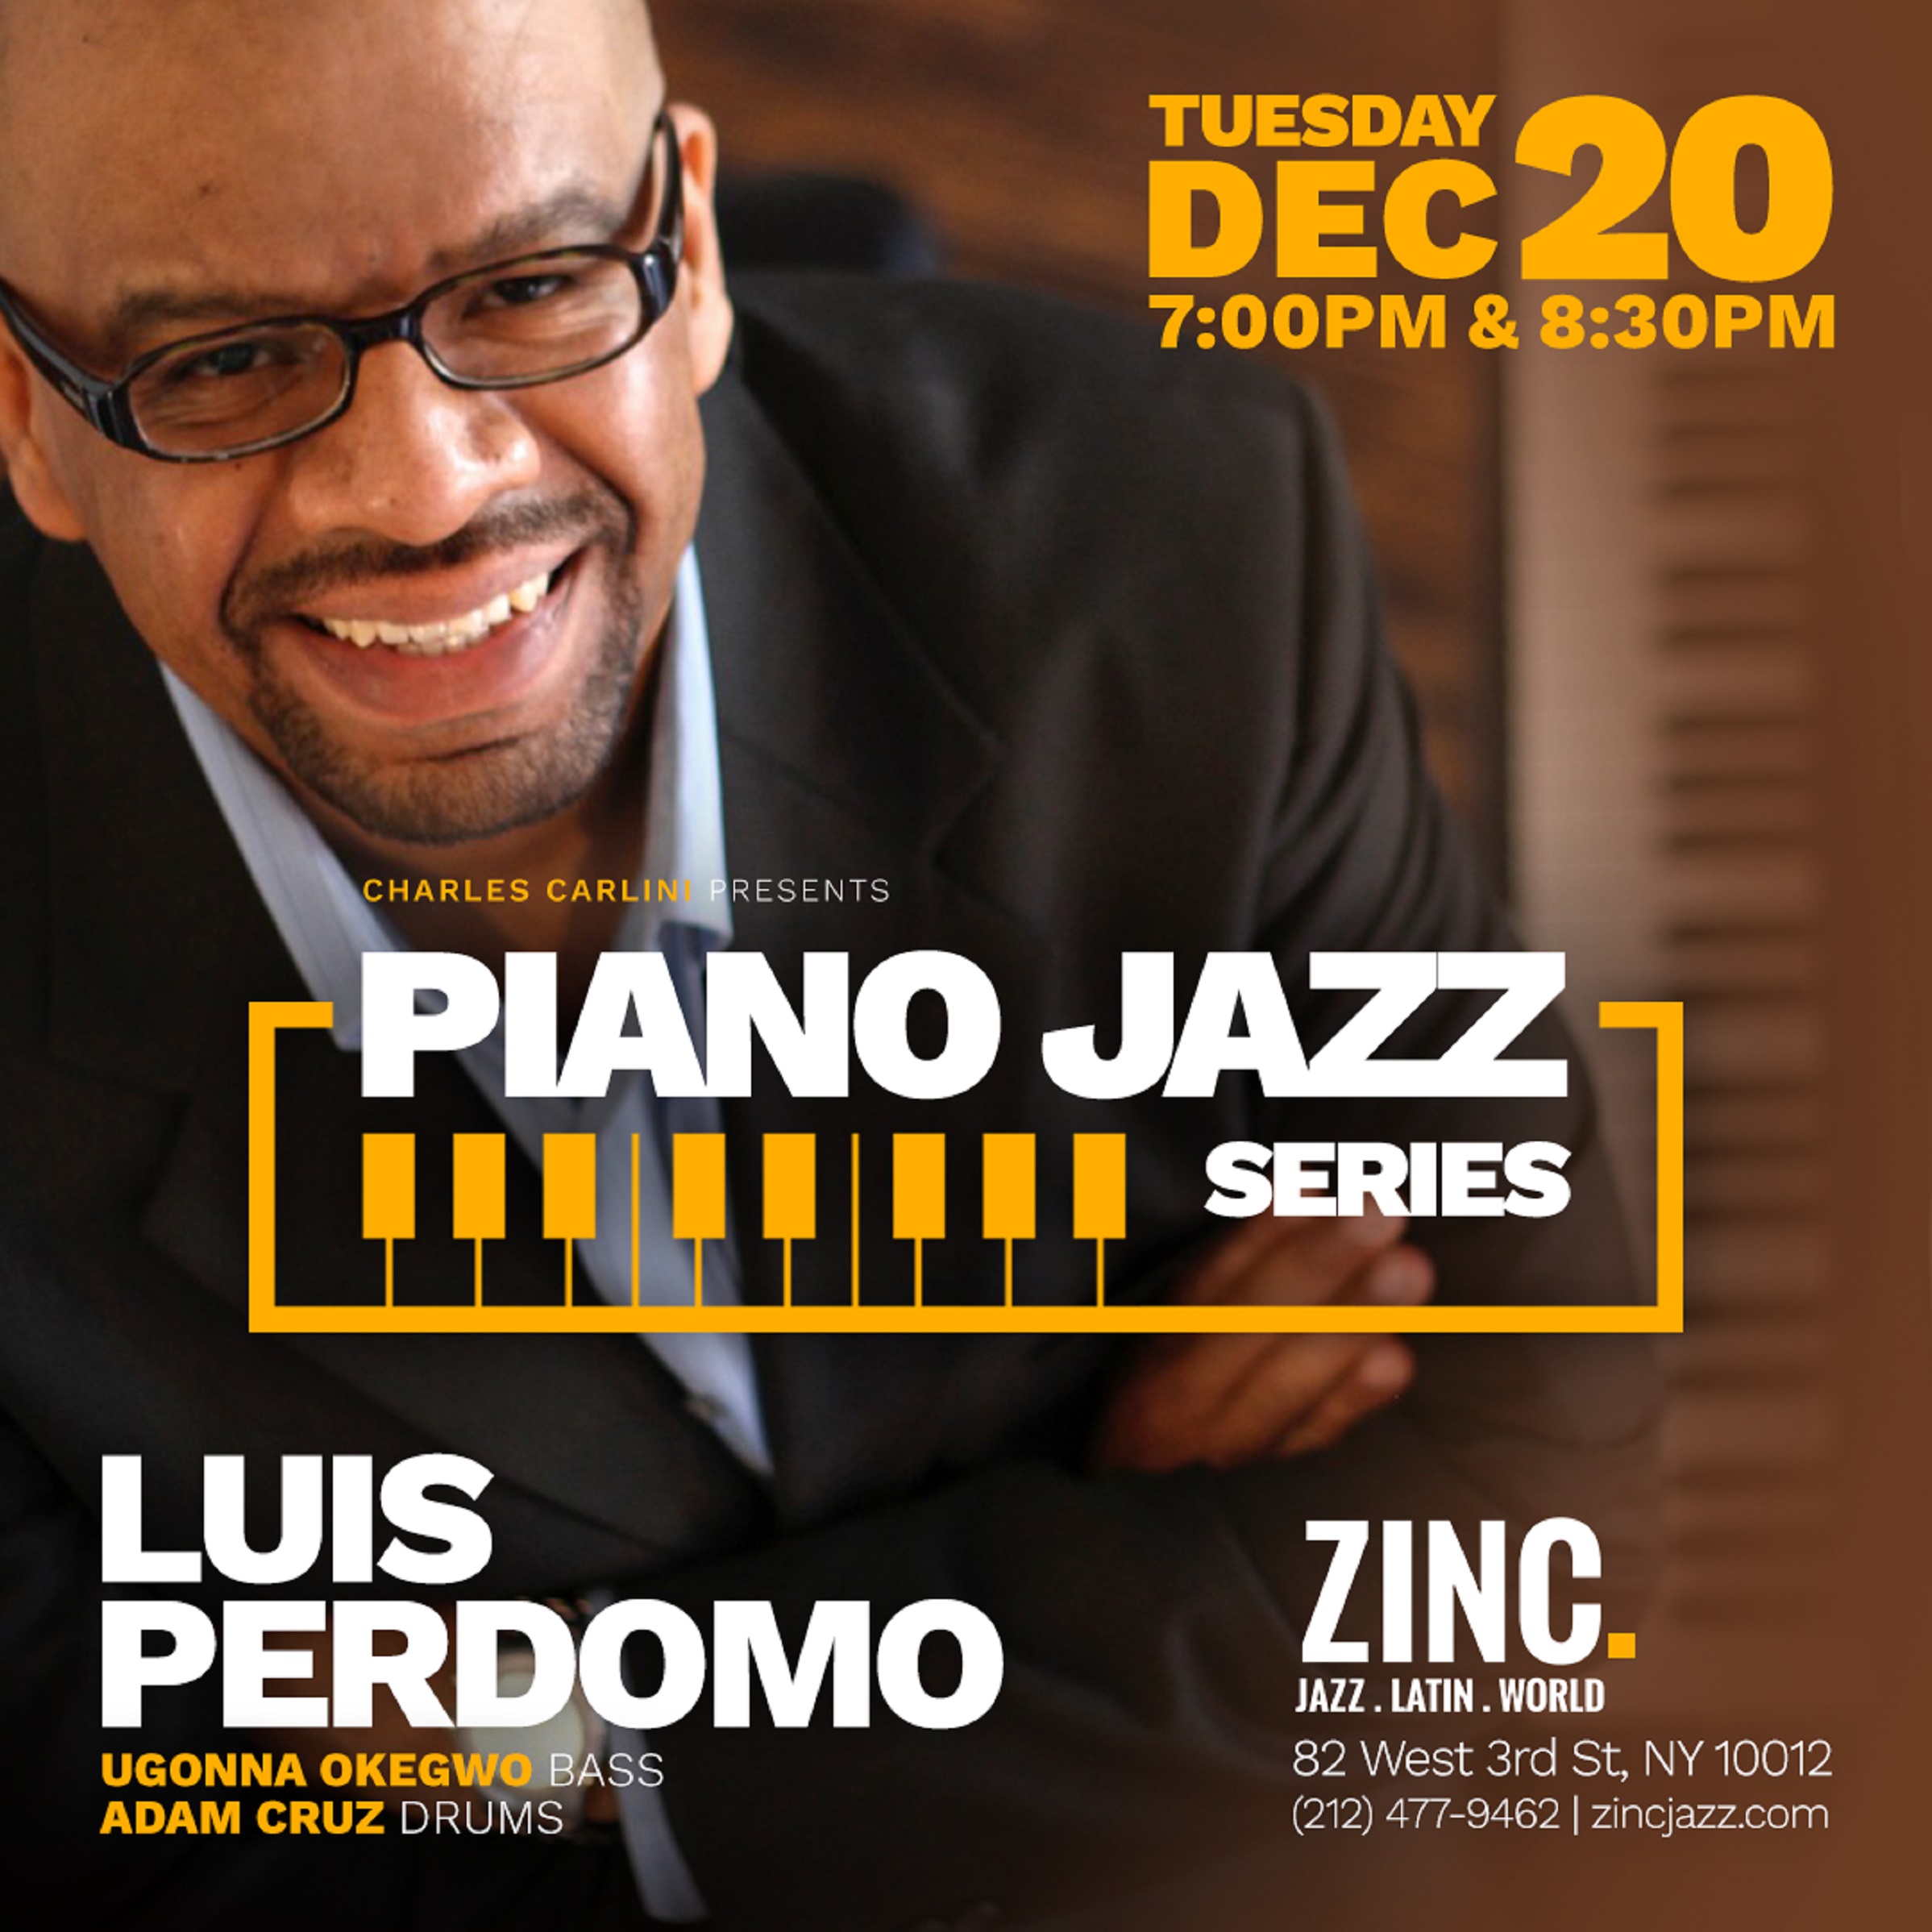 TONIGHT! Catch Acclaimed Pianist Luis Perdomo at Zinc!